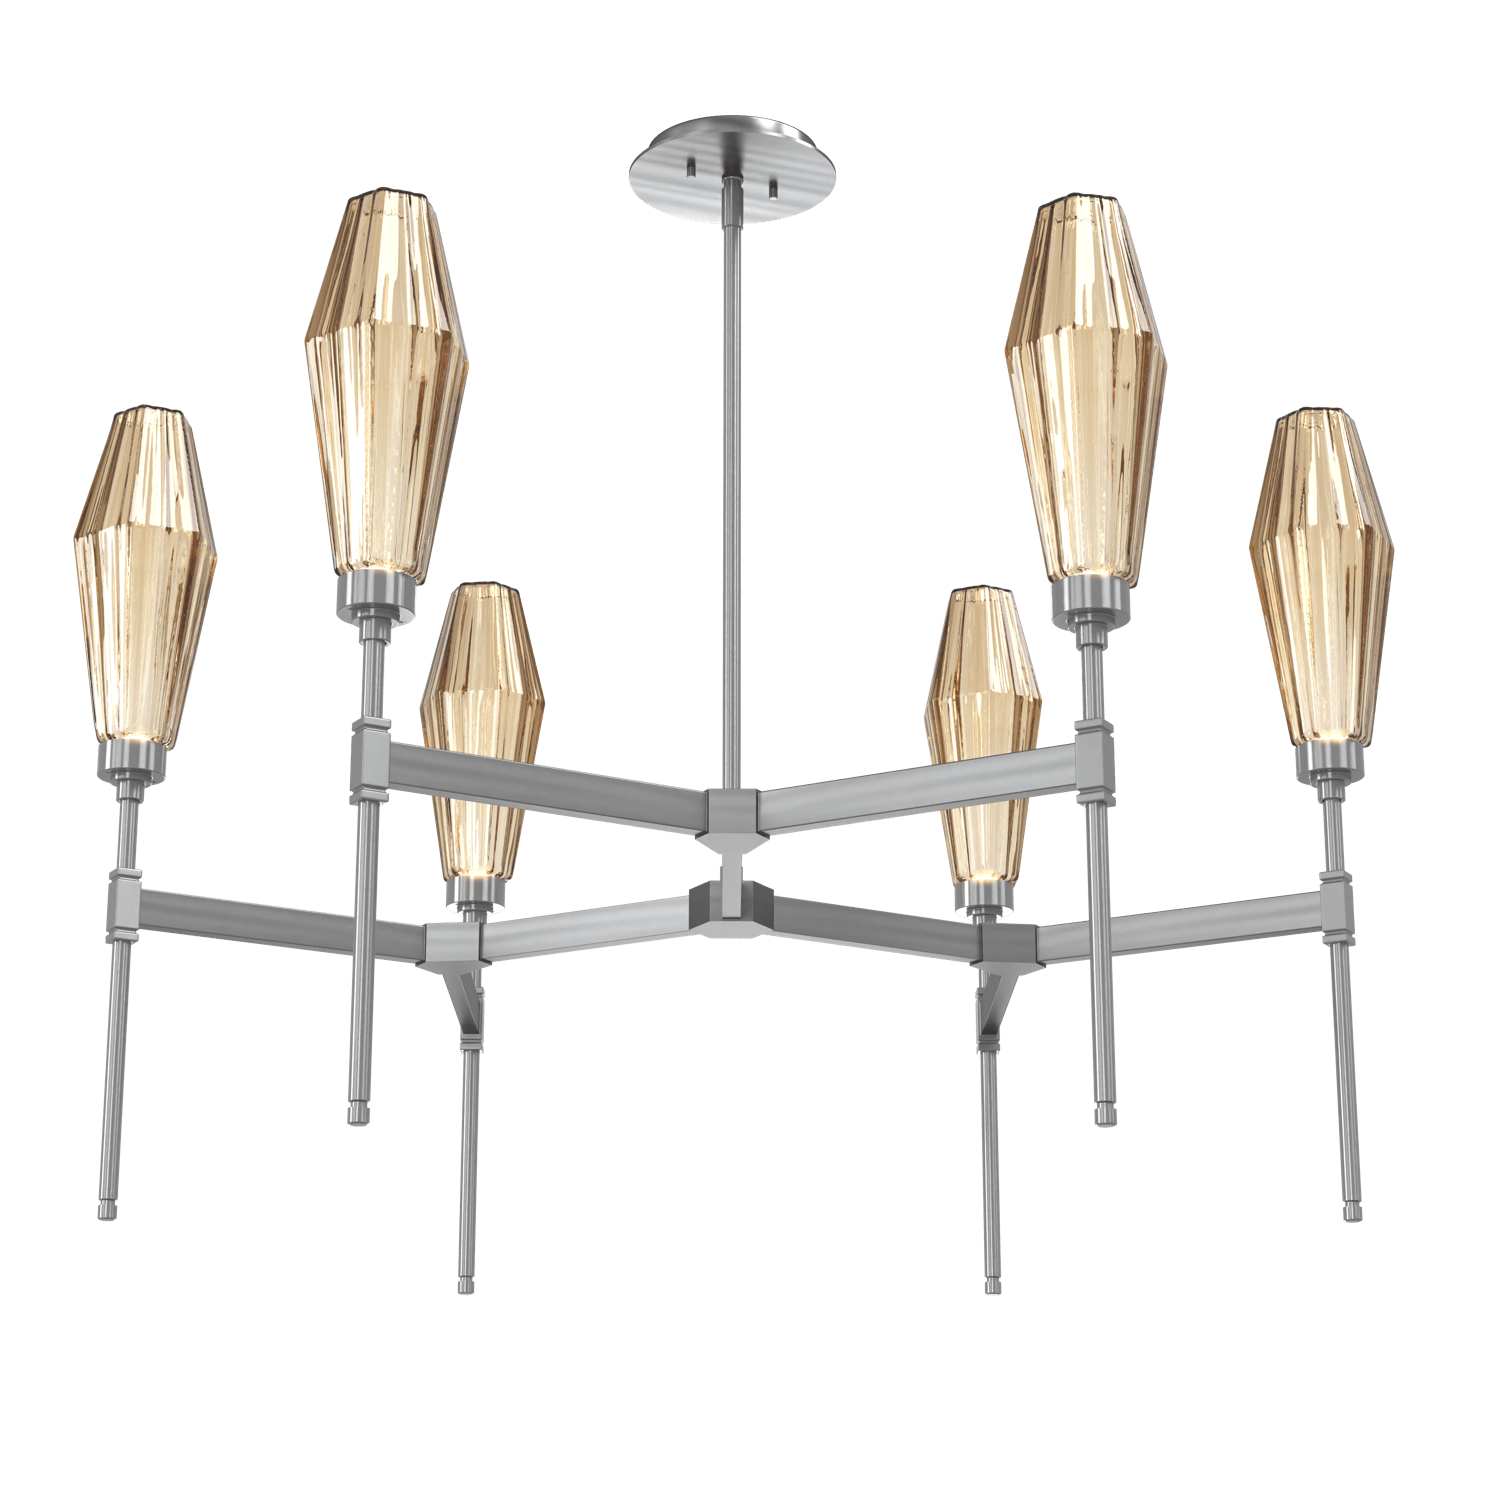 CHB0049-37-GM-RB-Hammerton-Studio-Aalto-37-inch-round-belvedere-chandelier-with-gunmetal-finish-and-optic-ribbed-bronze-glass-shades-and-LED-lamping